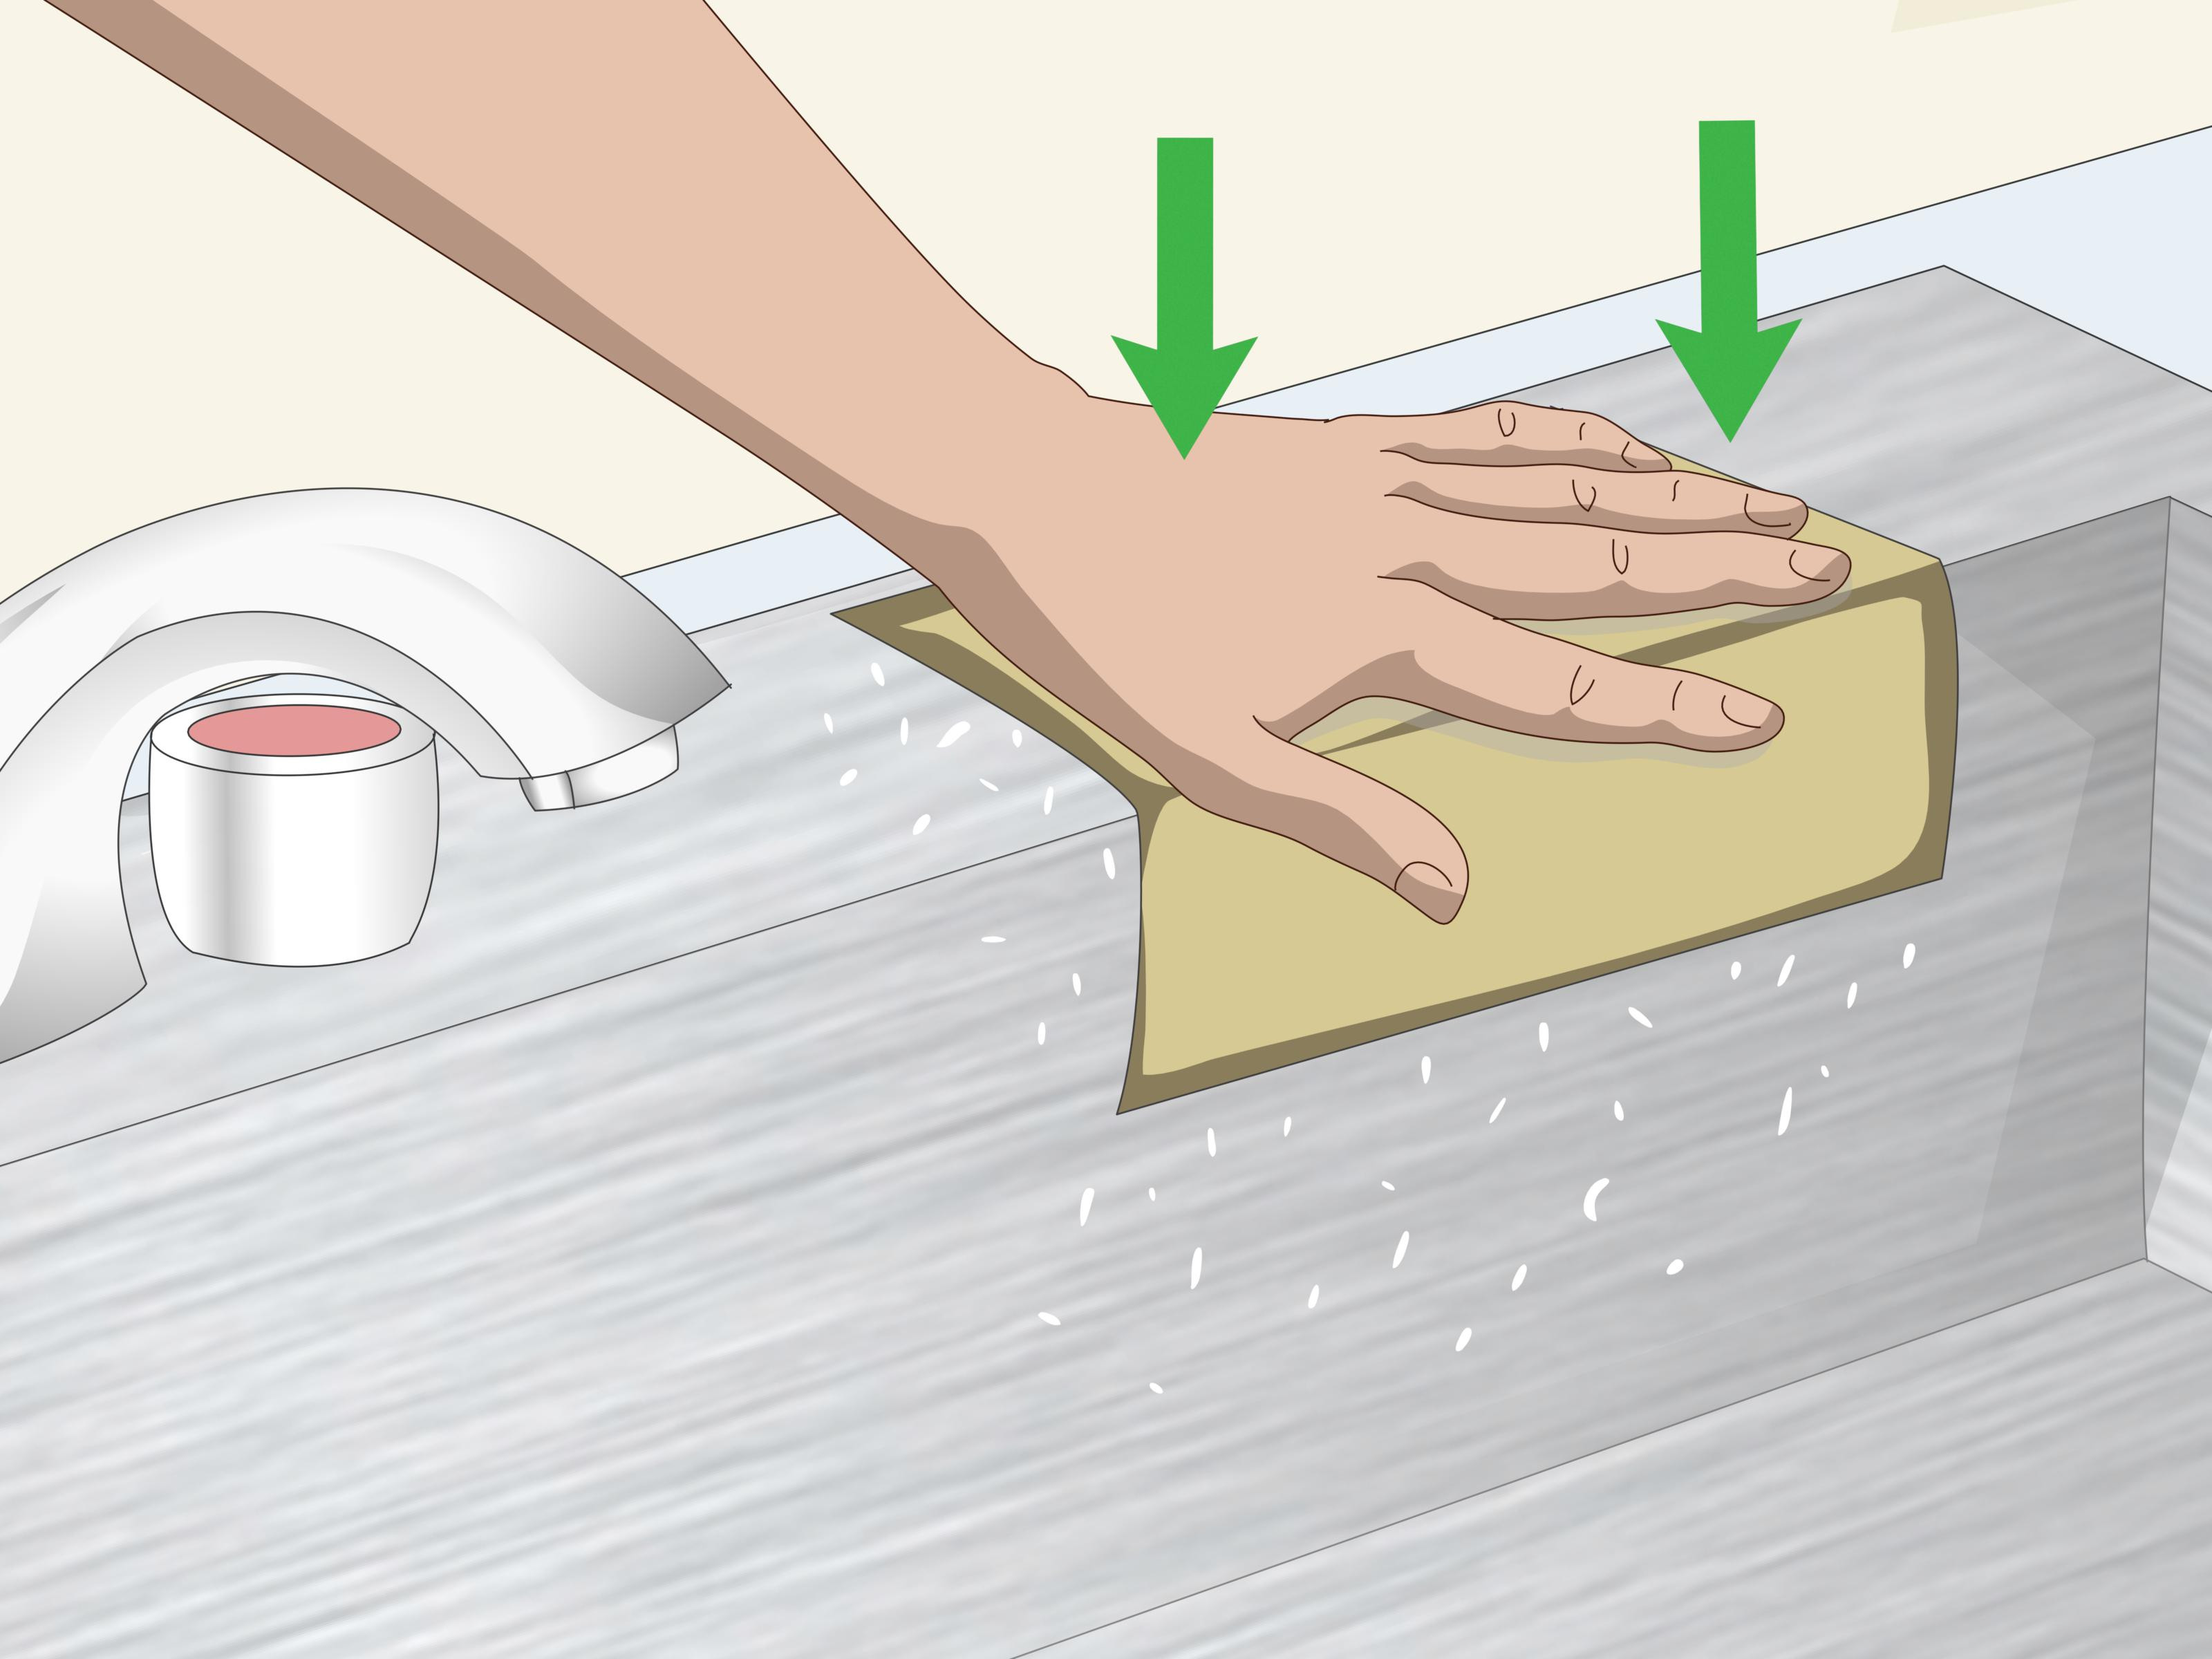 26 Fashionable Hardwood Floor Cleaner that Fills In Scratches 2024 free download hardwood floor cleaner that fills in scratches of 3 ways to get scratches out of a stainless steel sink wikihow throughout get scratches out of a stainless steel sink step 12